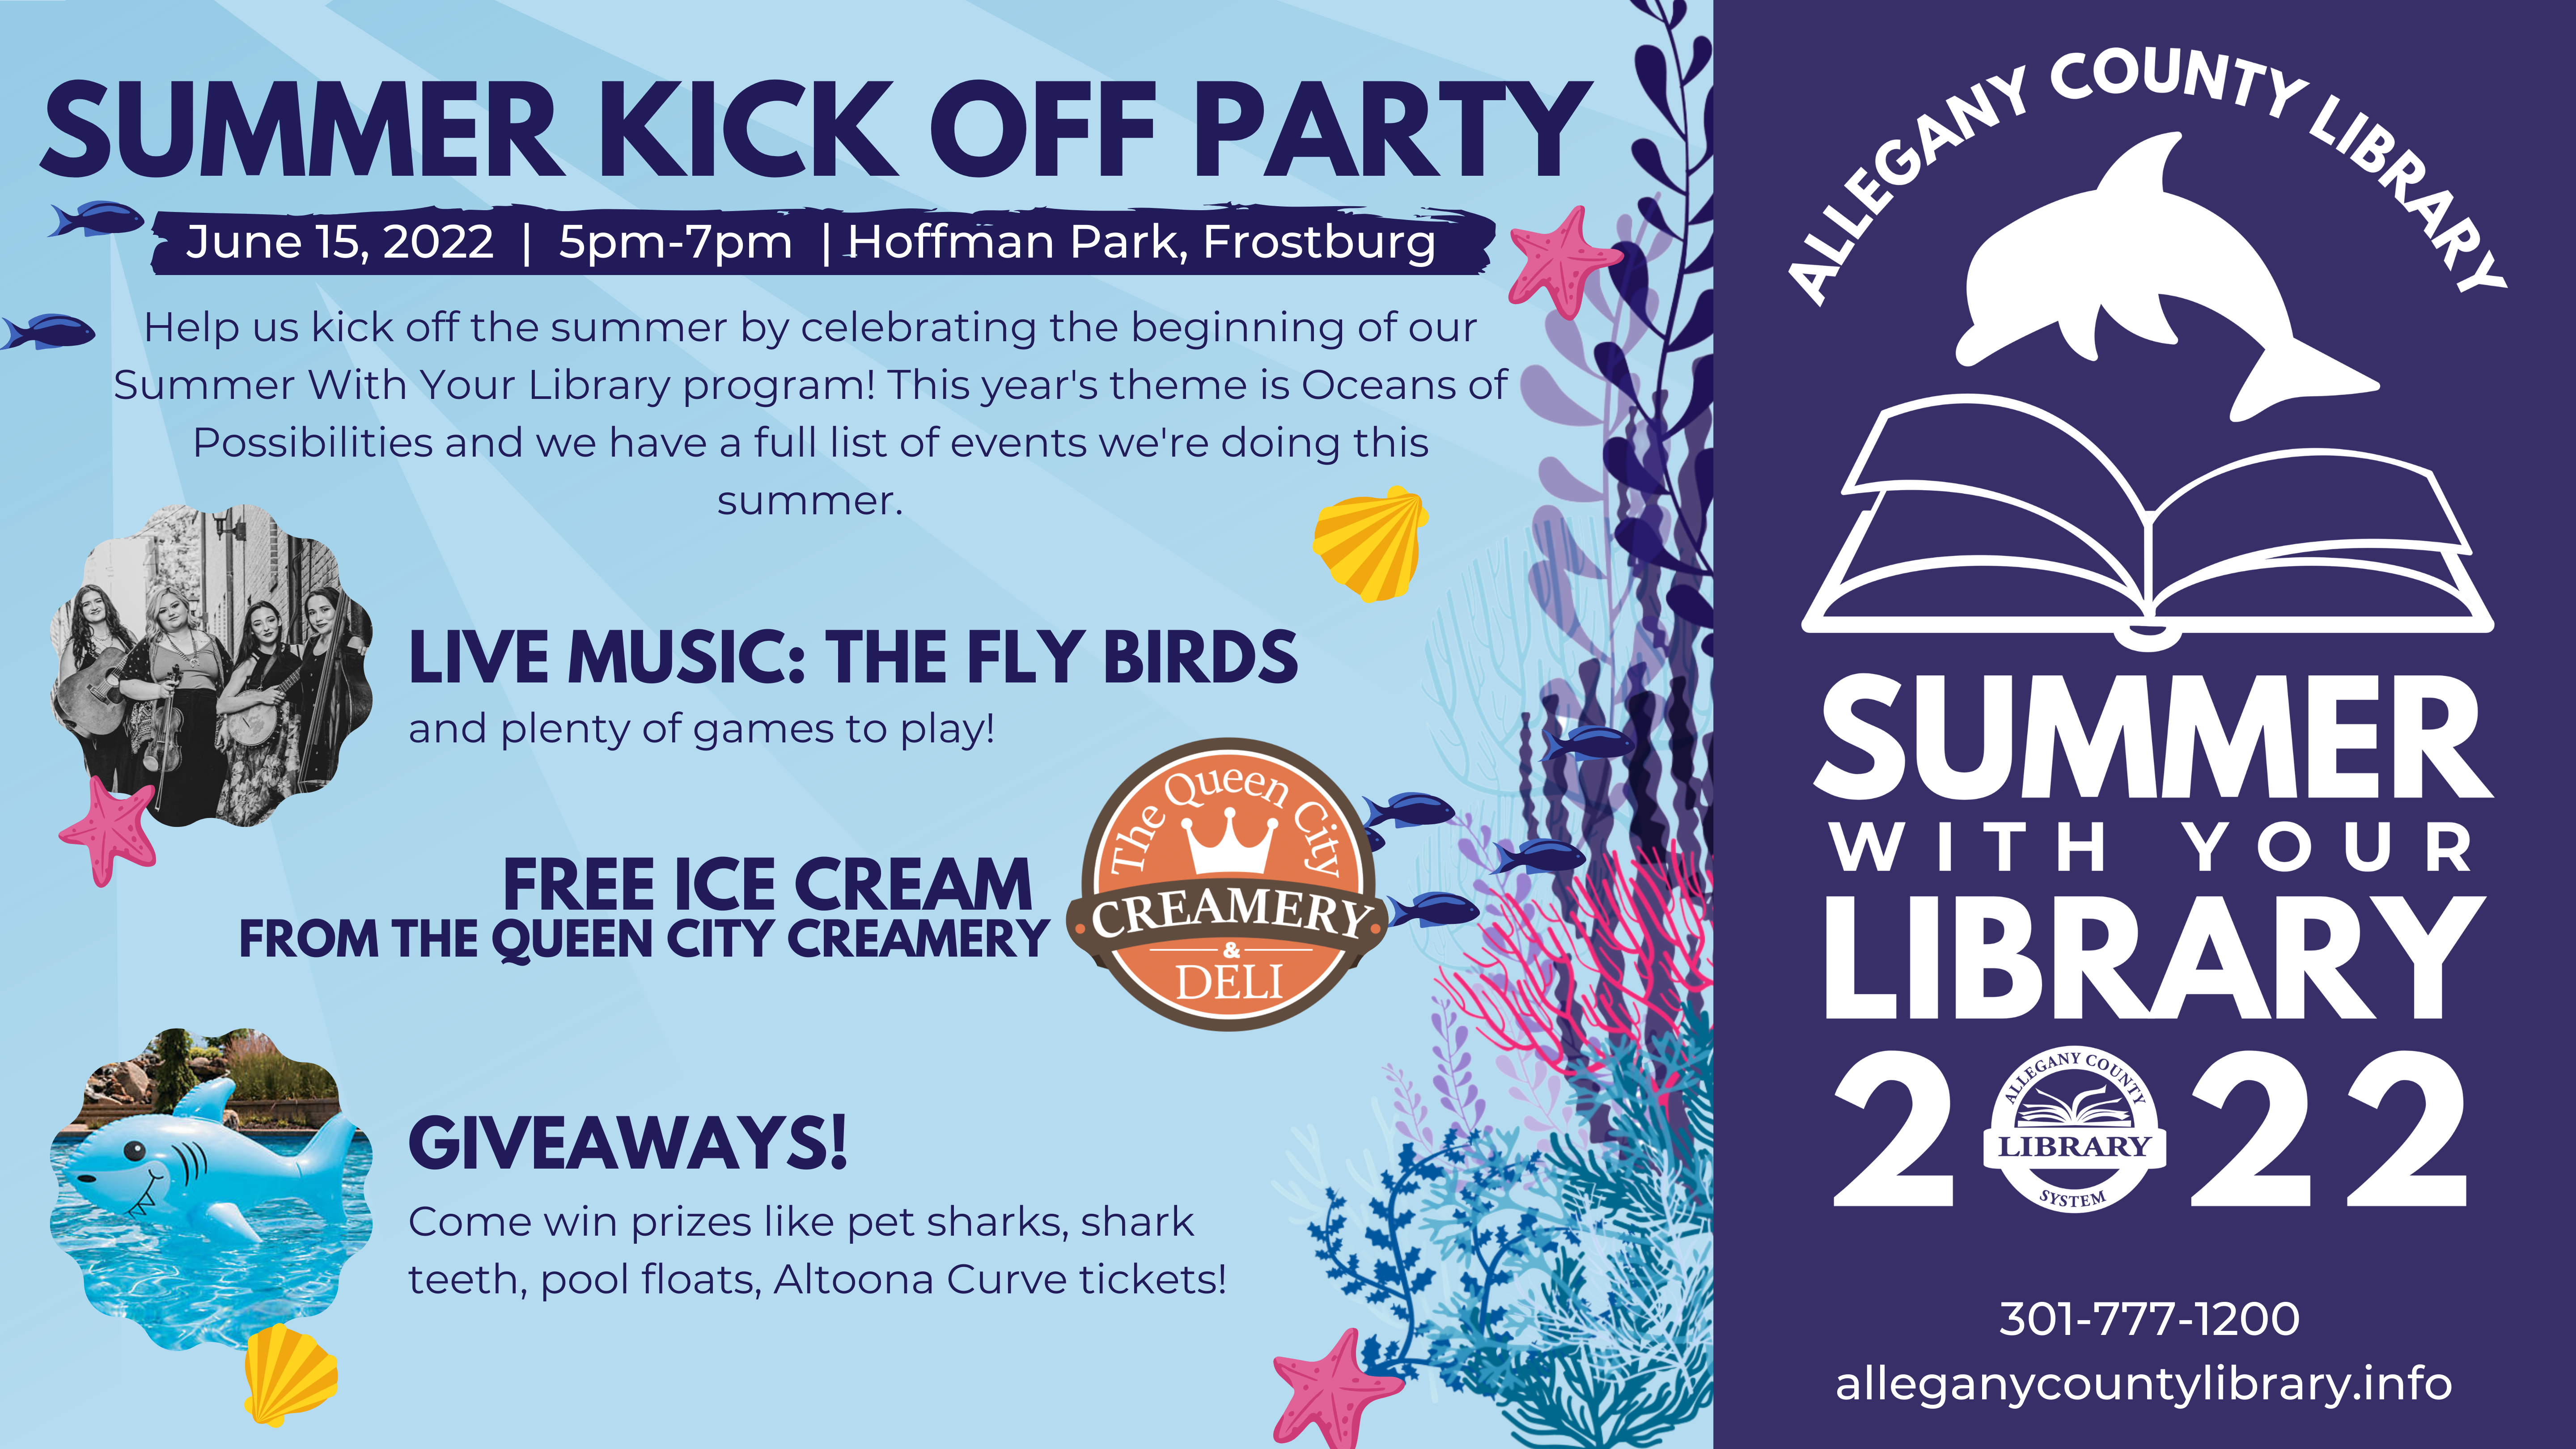 Summer Reading logo on the right, event details on the left